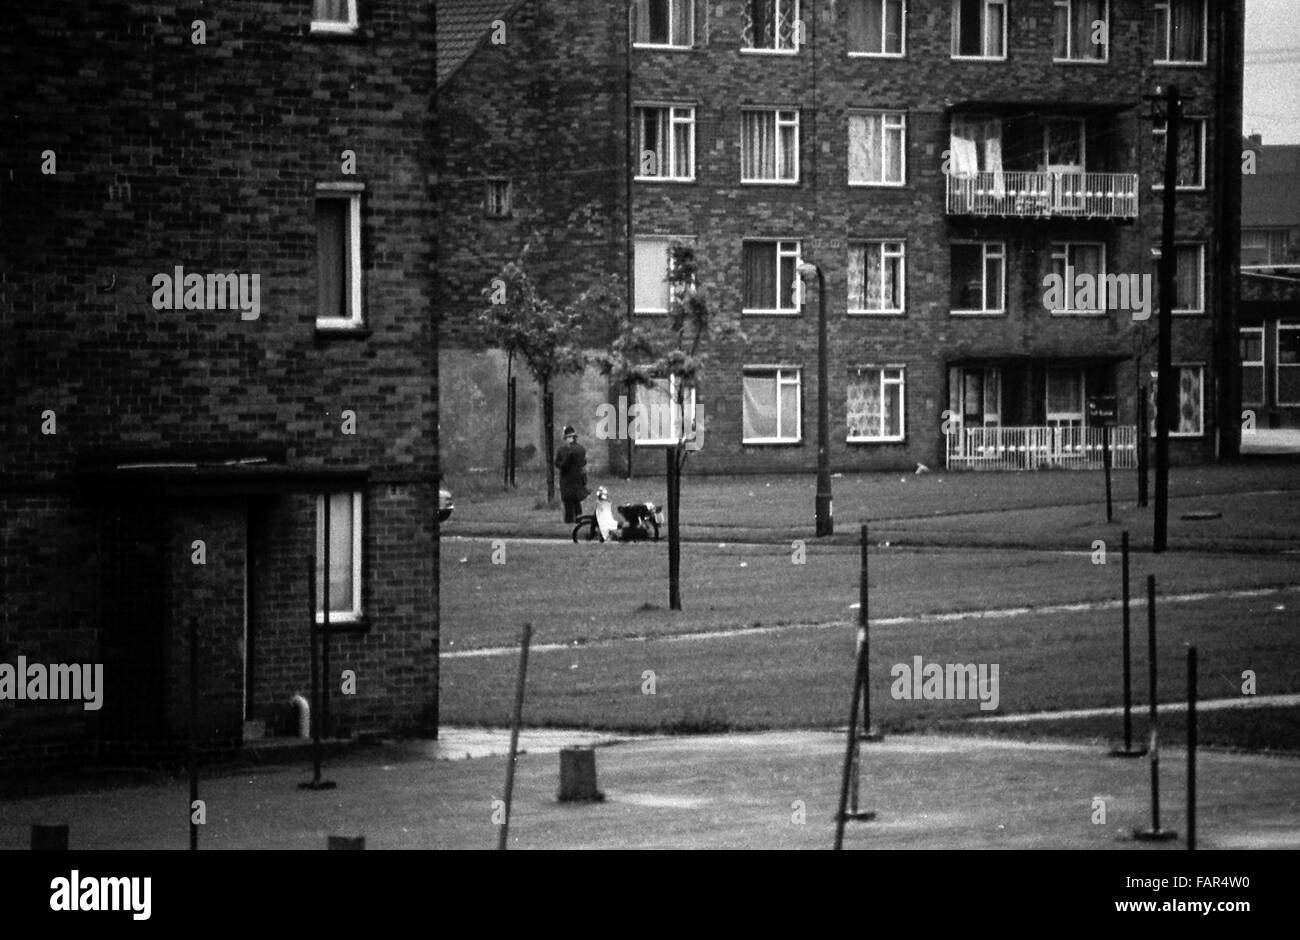 The Boulevard, Buttershaw Estate, Bradford, West Yorkshire, UK. A sprawling local authority 1950's council housing scheme. Black and white images from 1982 portray the gritty surroundings of a typical northern England working class sink estate. Stock Photo